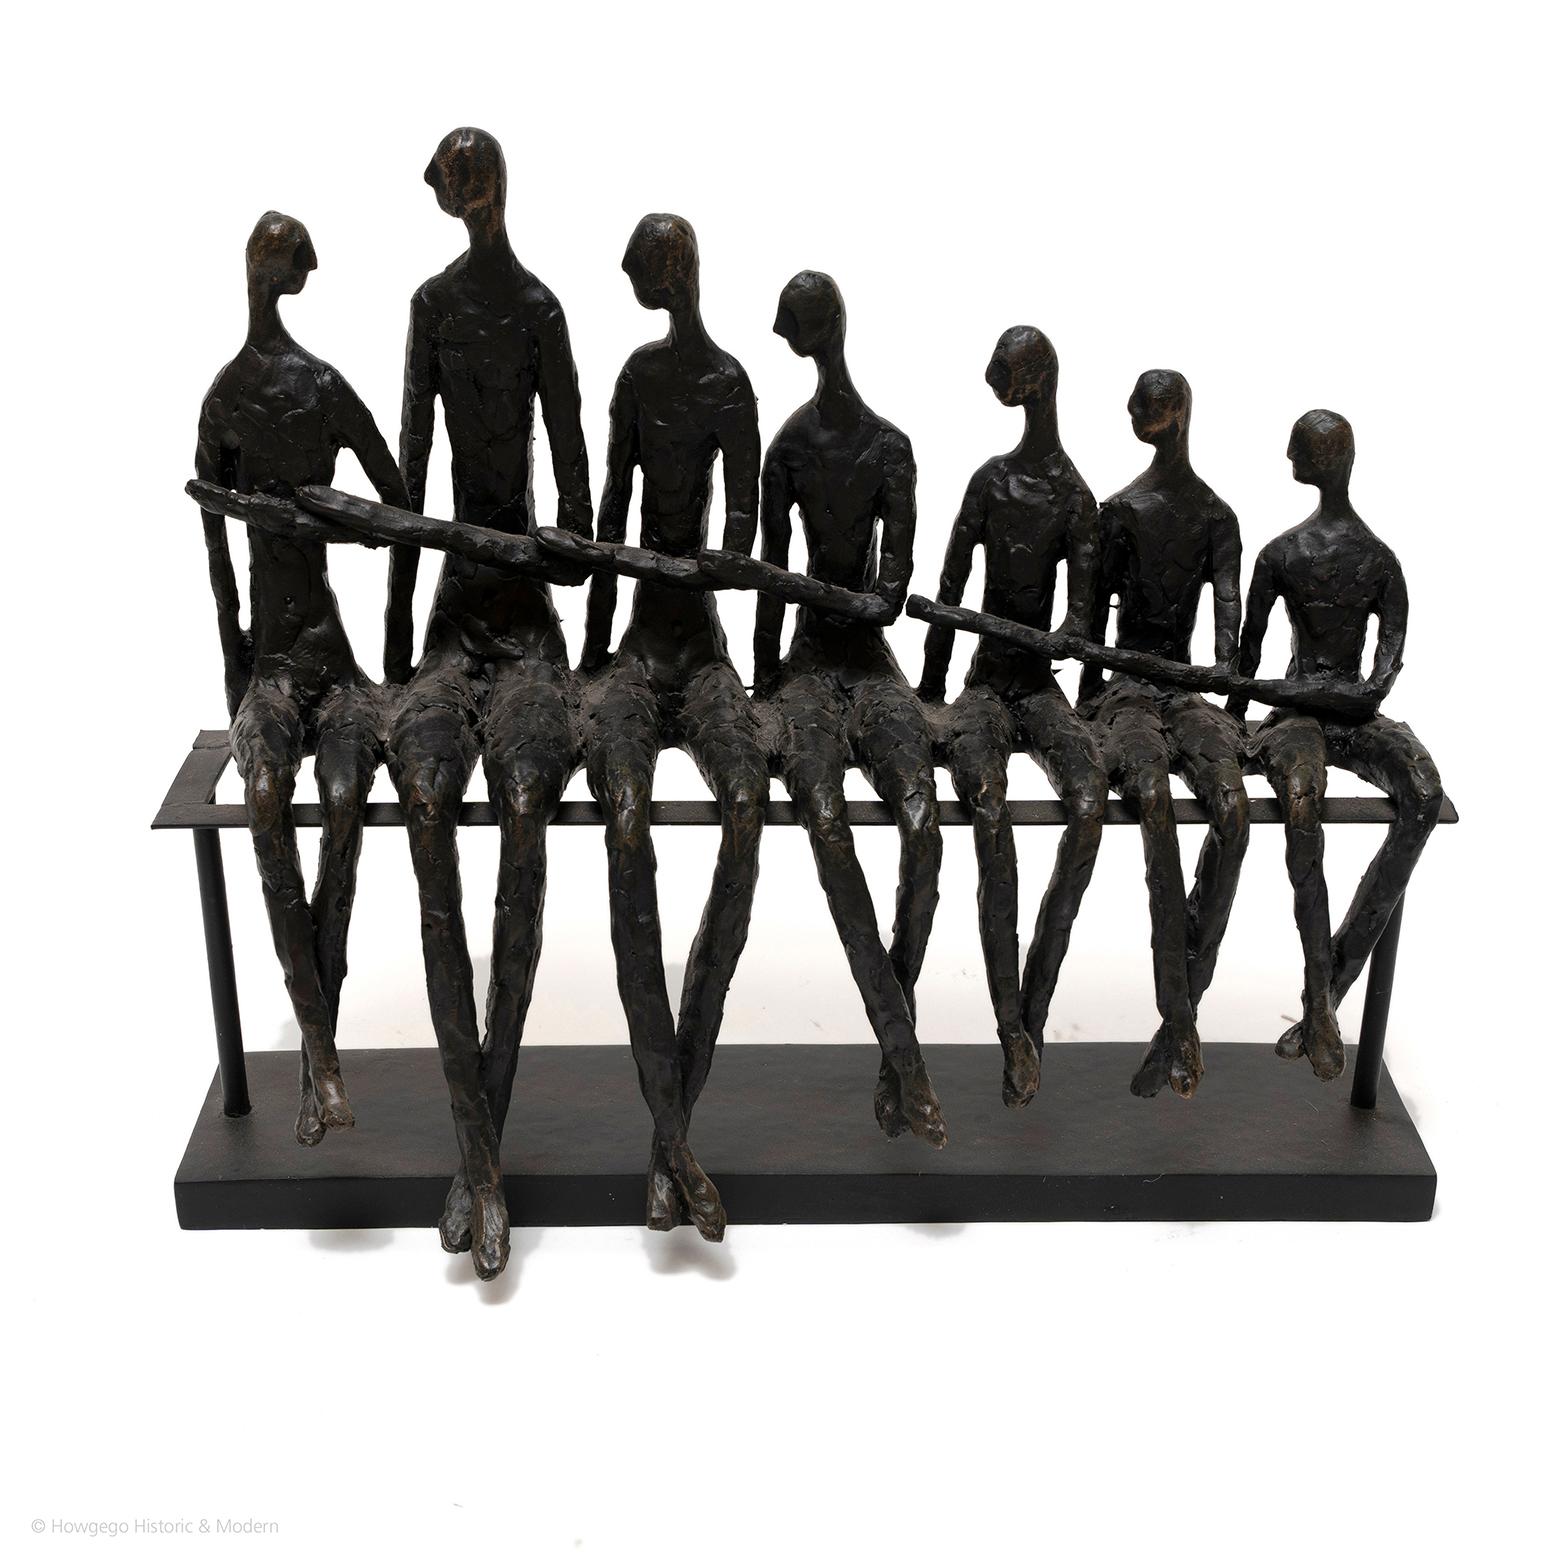 A group of 7 stick-thin figures sitting on a bench, each looking at the figure beside them and joining left hands with each other, in the manner of Alberto Giacometti.

Alberto Giacometti is best known for his elongated figures, often walking or